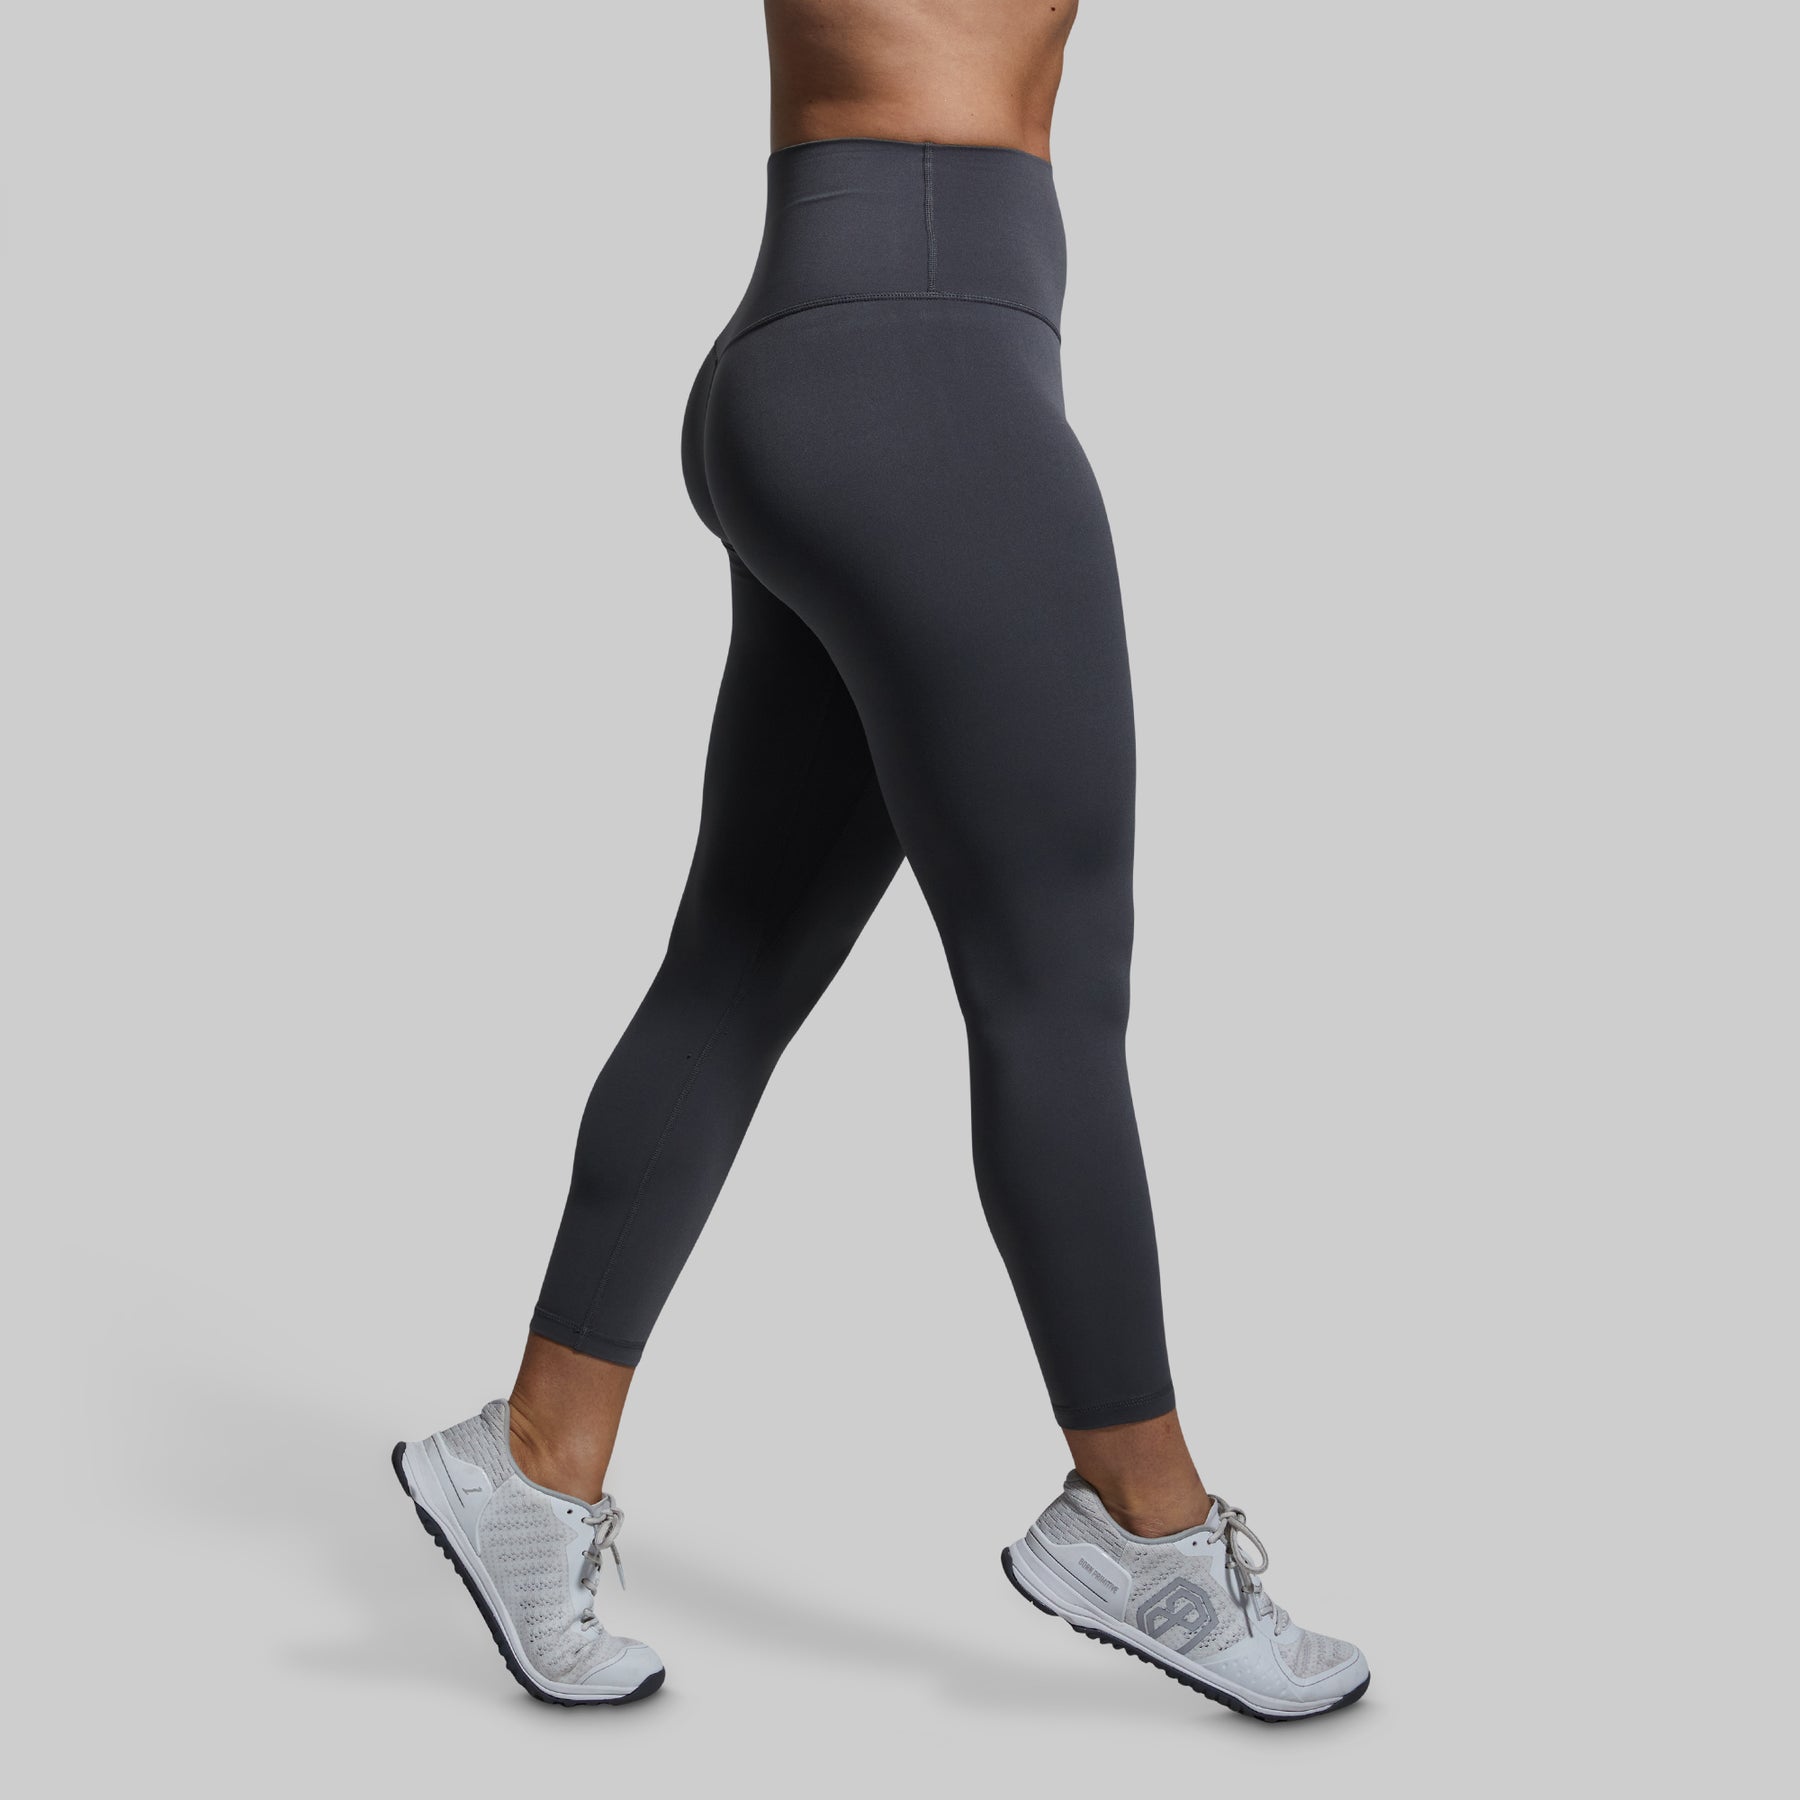 Lululemon Align High Rise Pant 28 Double Lined – The Shop at Equinox